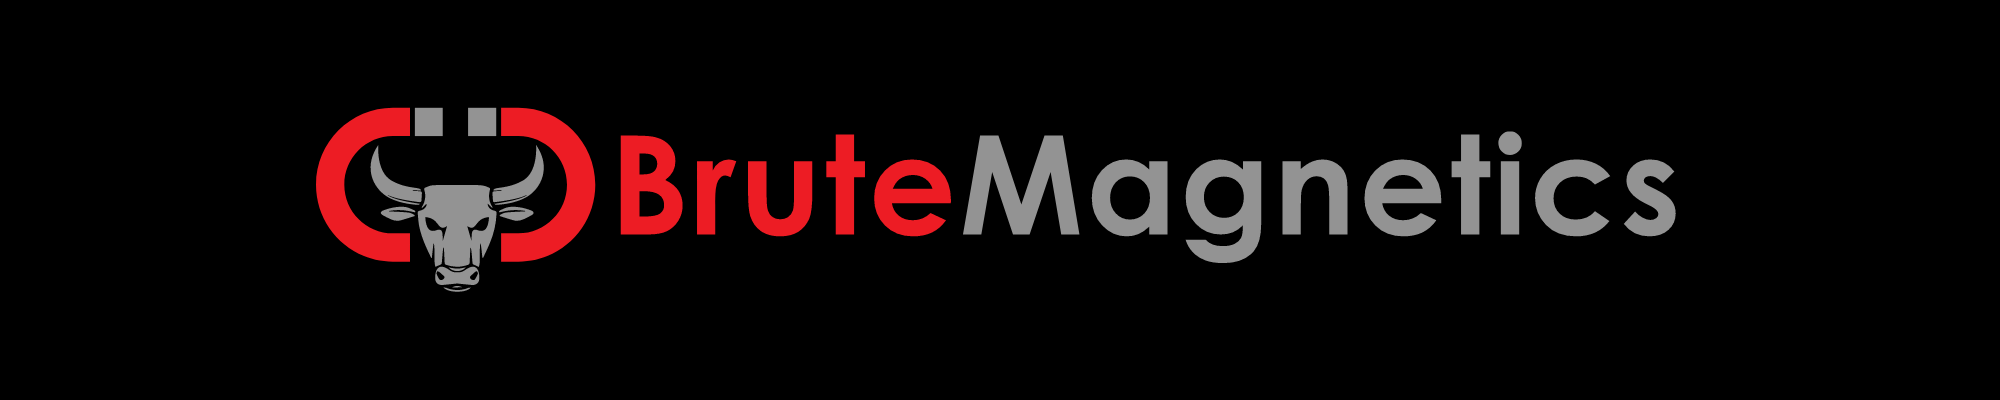 A Year in Review 🎉 - Brute Magnetics